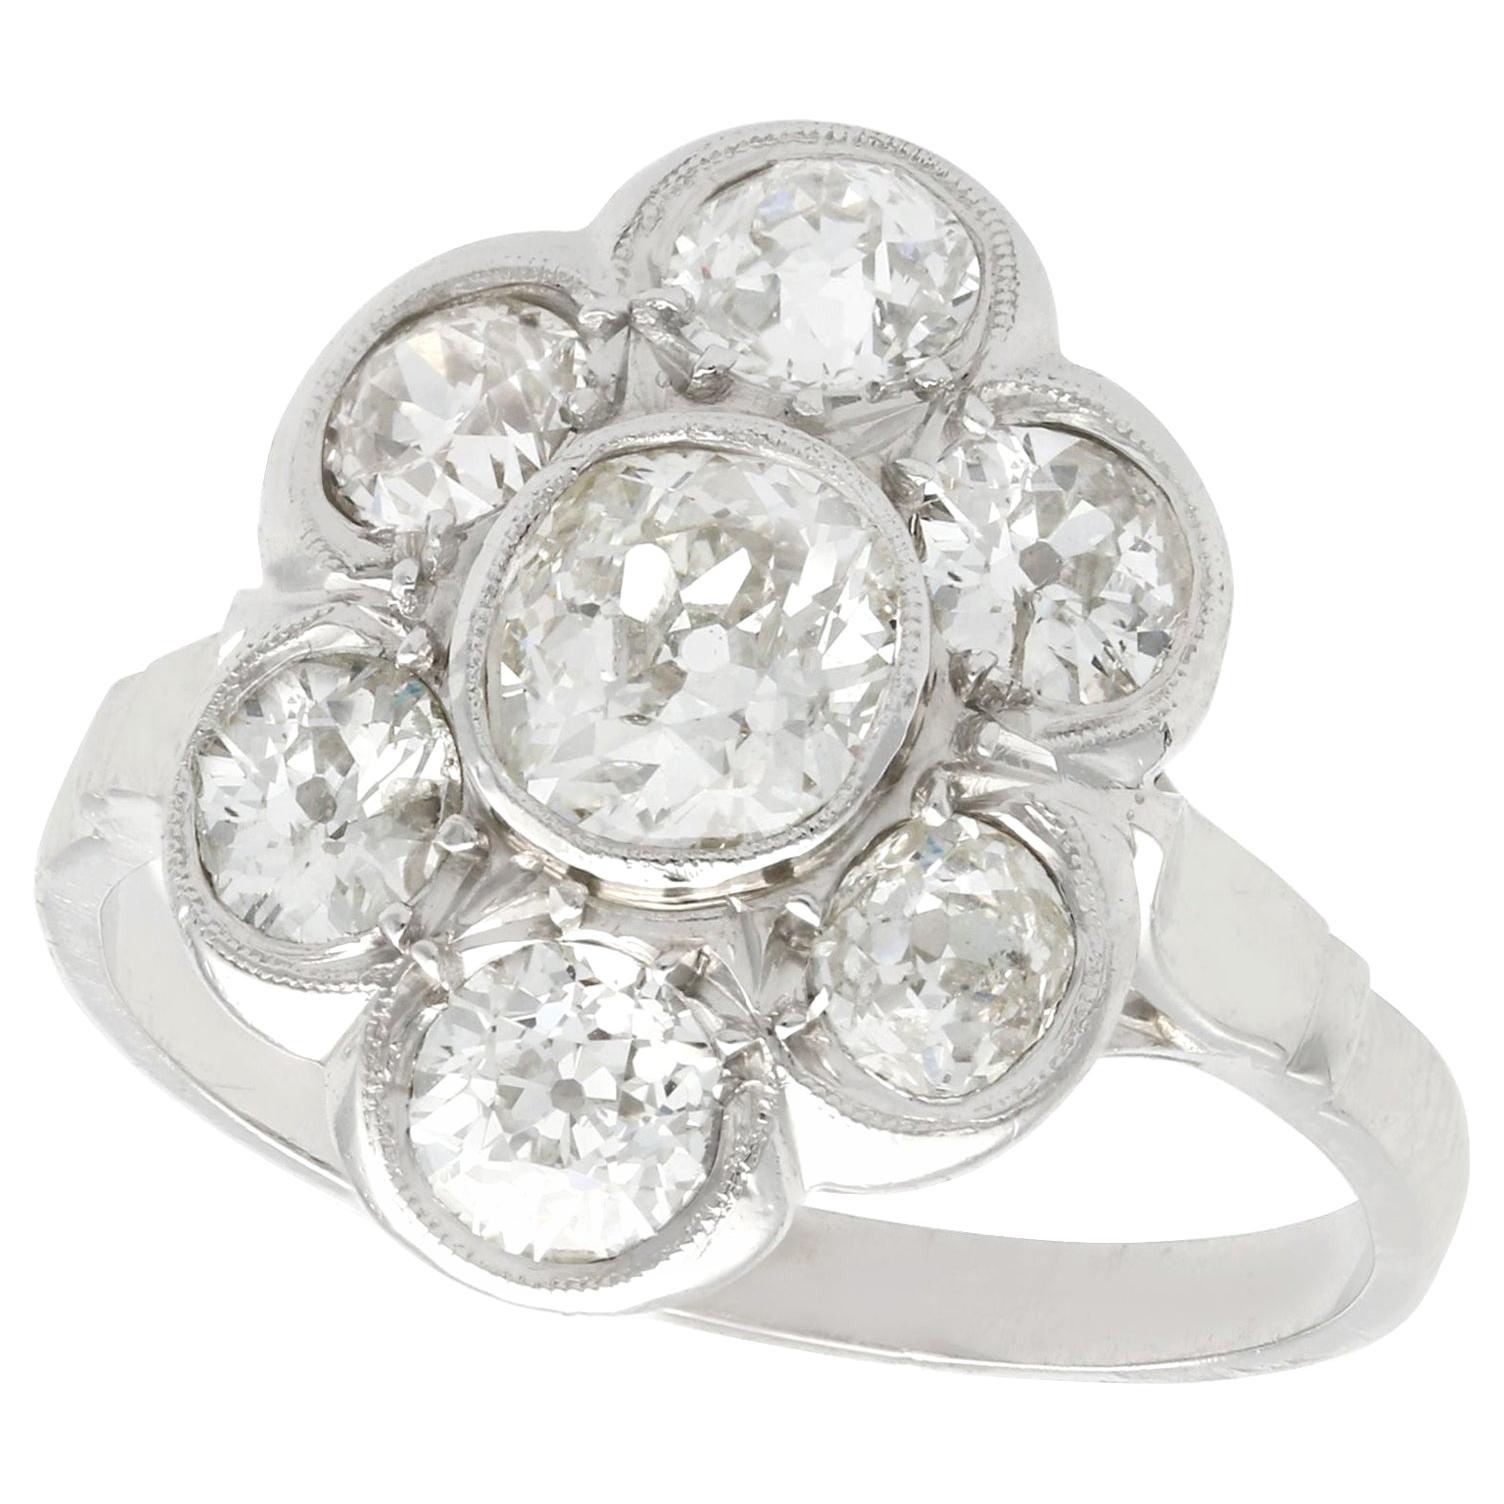 Vintage 1940s French 2.92 Carat Diamond and Platinum Cluster Ring